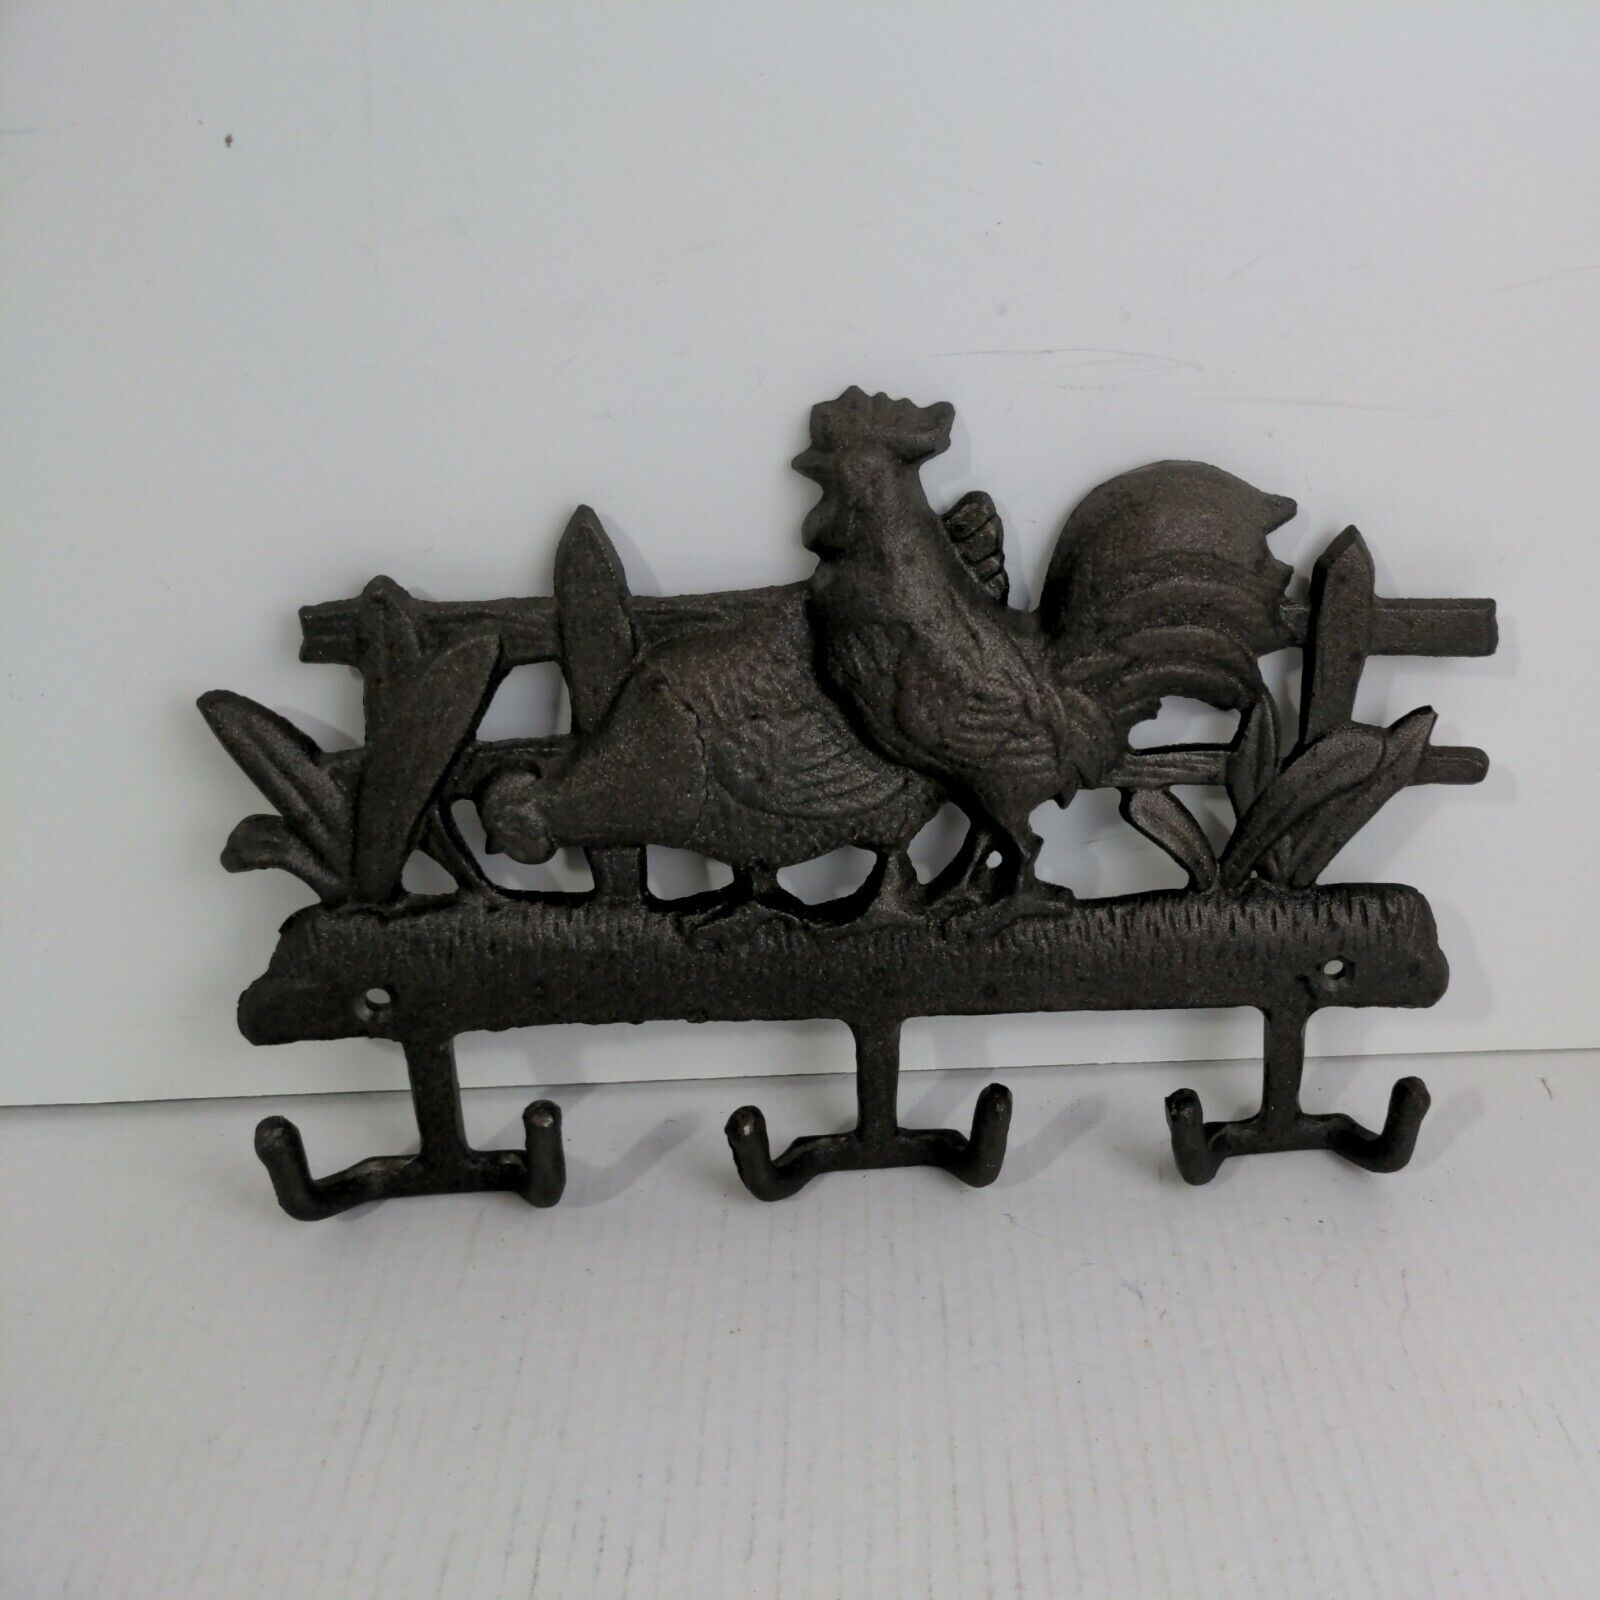 VTg Cast Iron Coat Hanger Wall Decor Roosters 13\